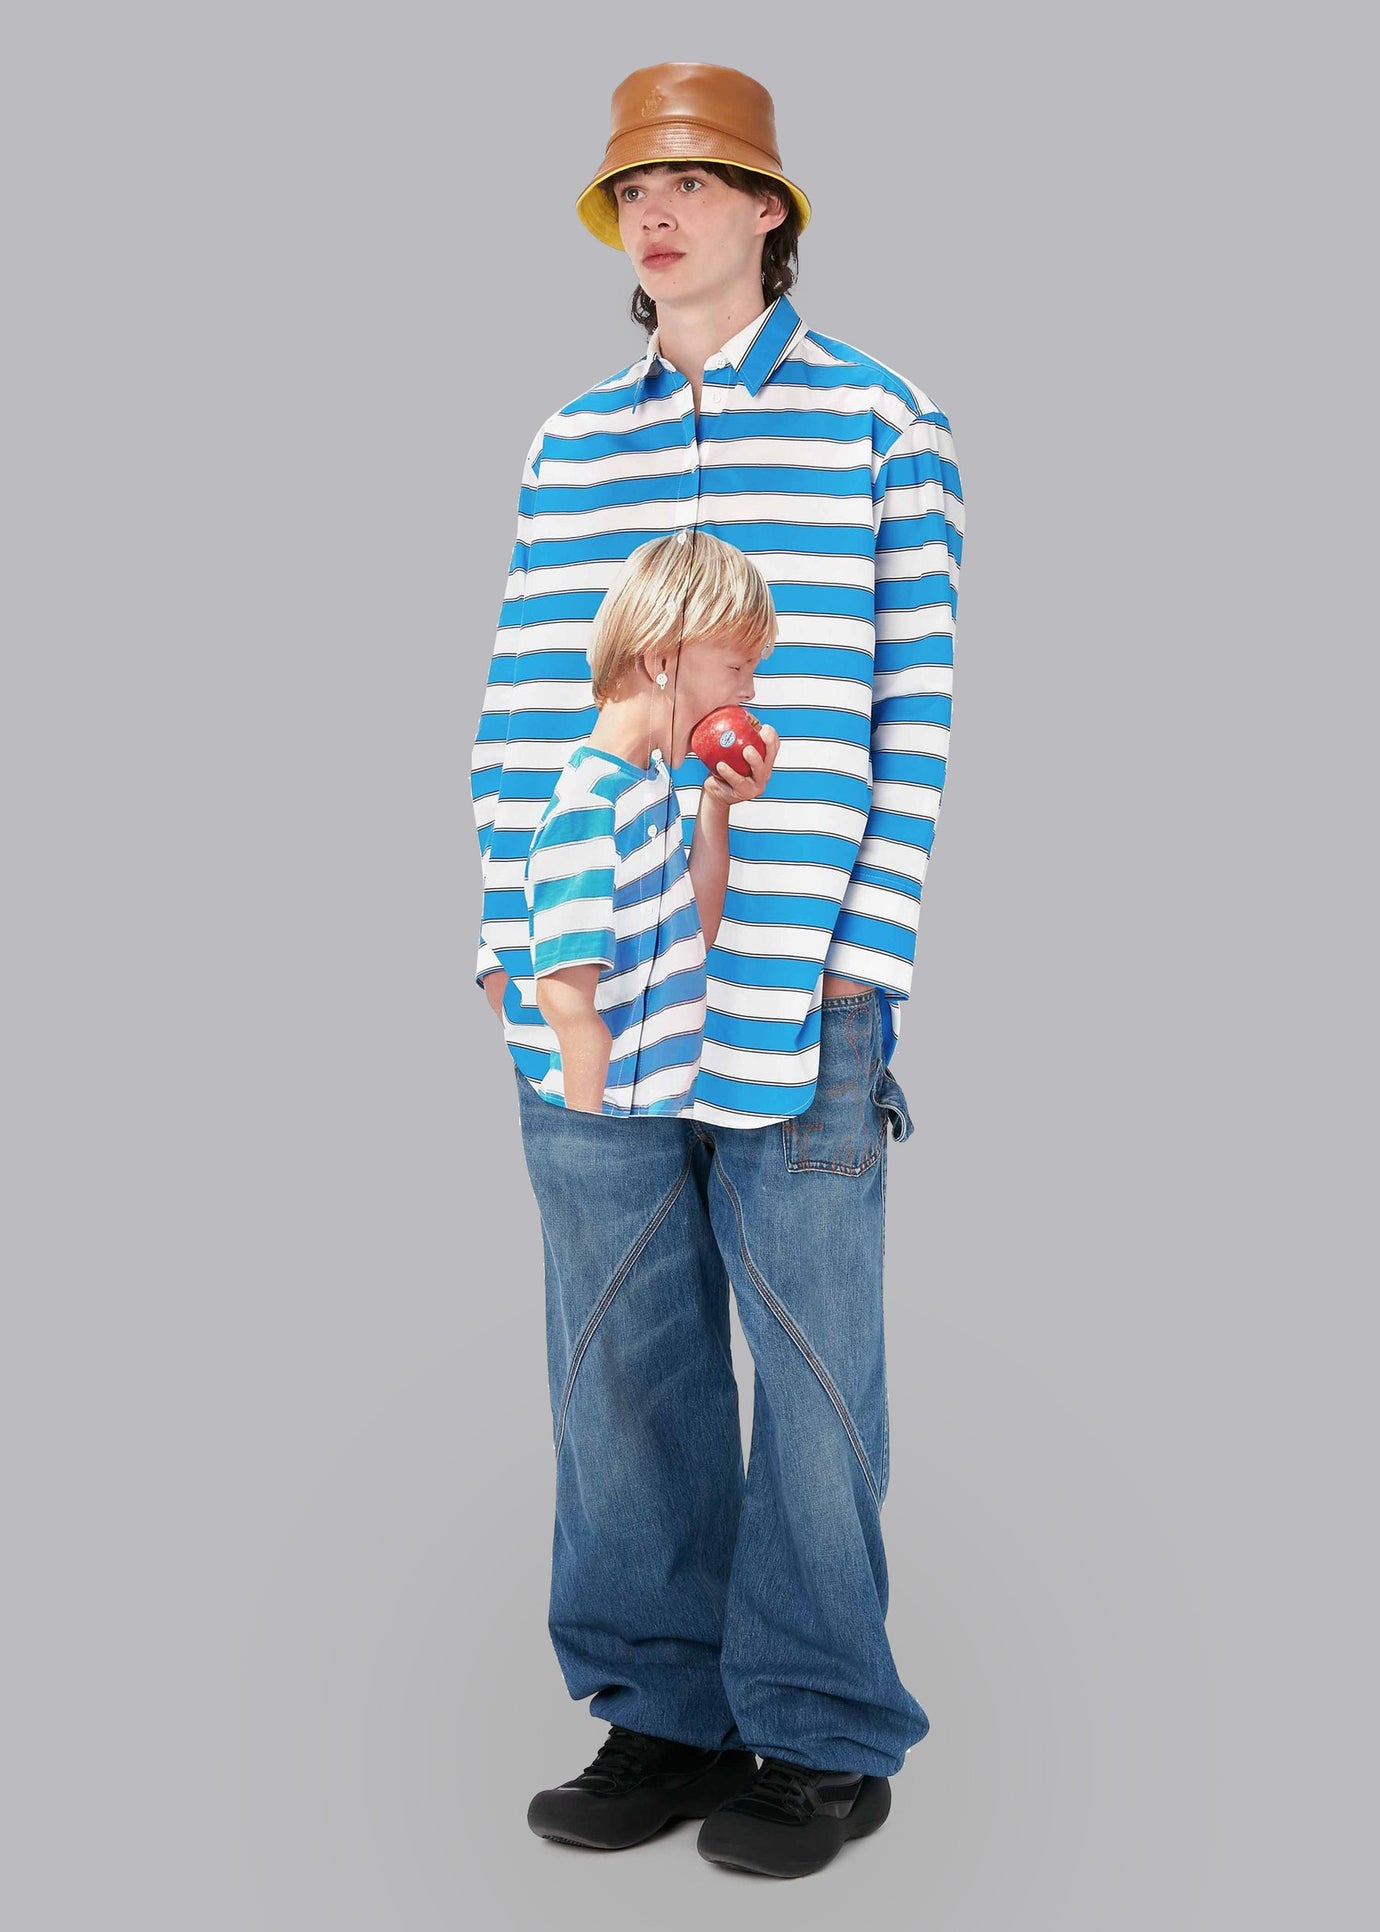 JW Anderson Boy with Apple Oversized Shirt - Blue/White - 1